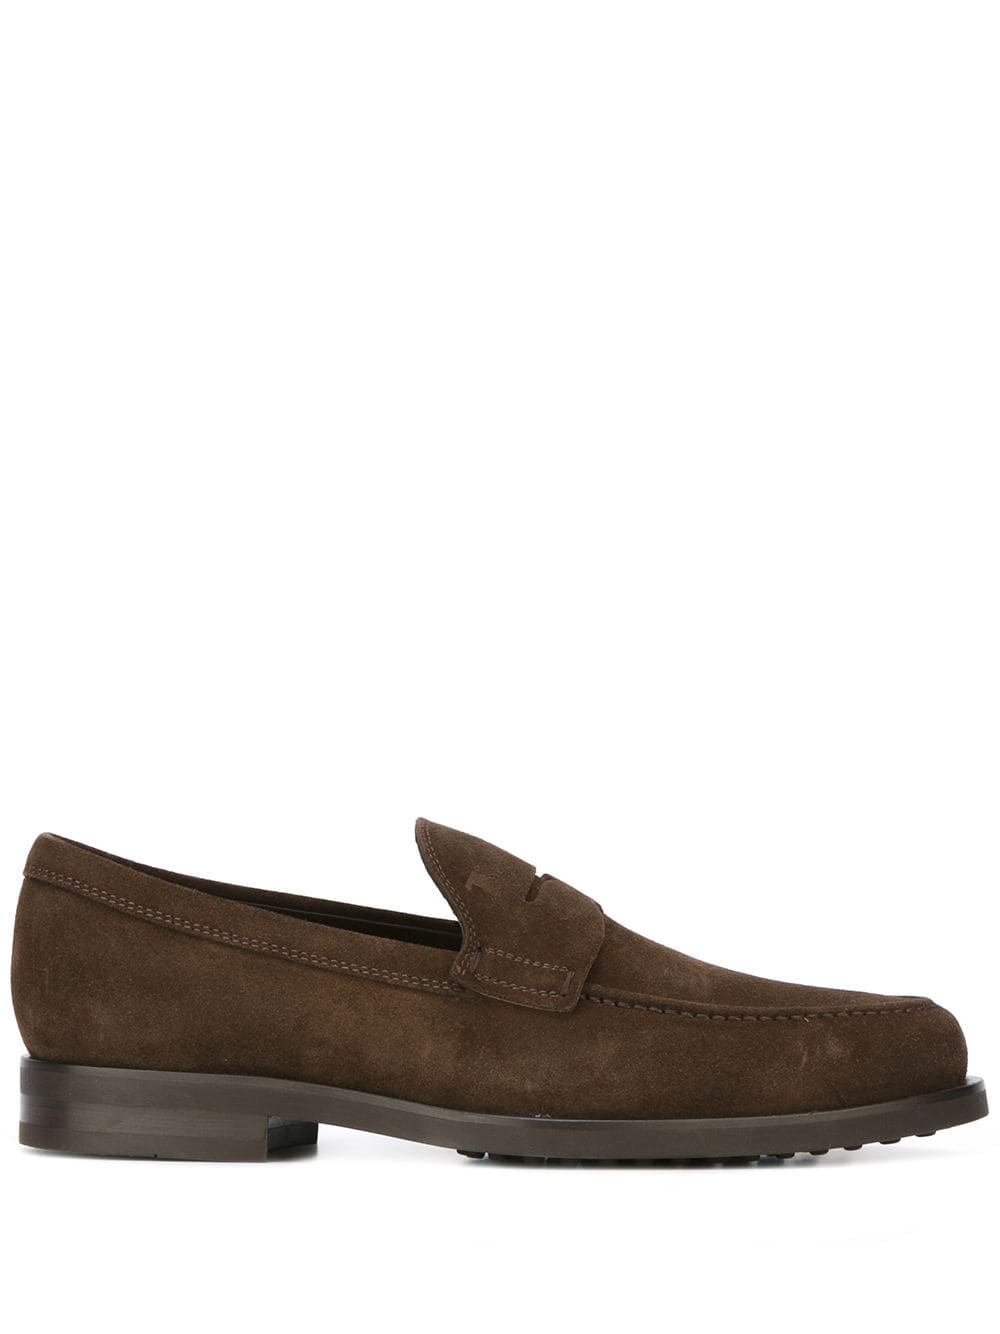 TOD'S ZF FORMAL LOAFERS